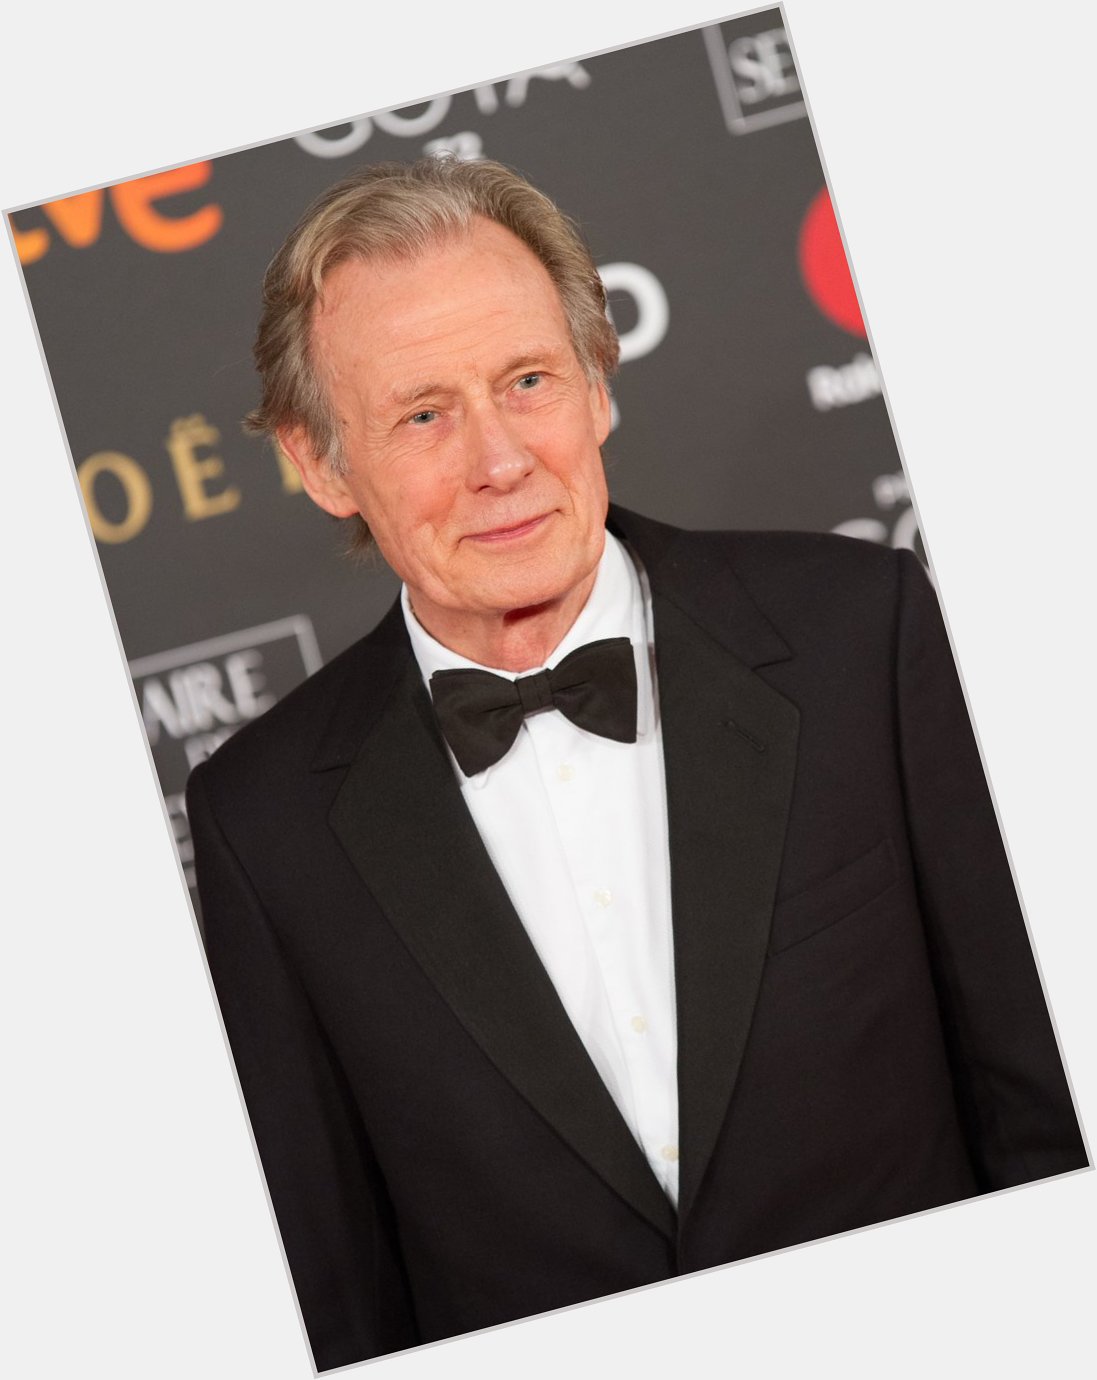  Happy birthday to Bill Nighy who portrayed Rufus Scrimgeour in and the Deathly Hallows Part One! 